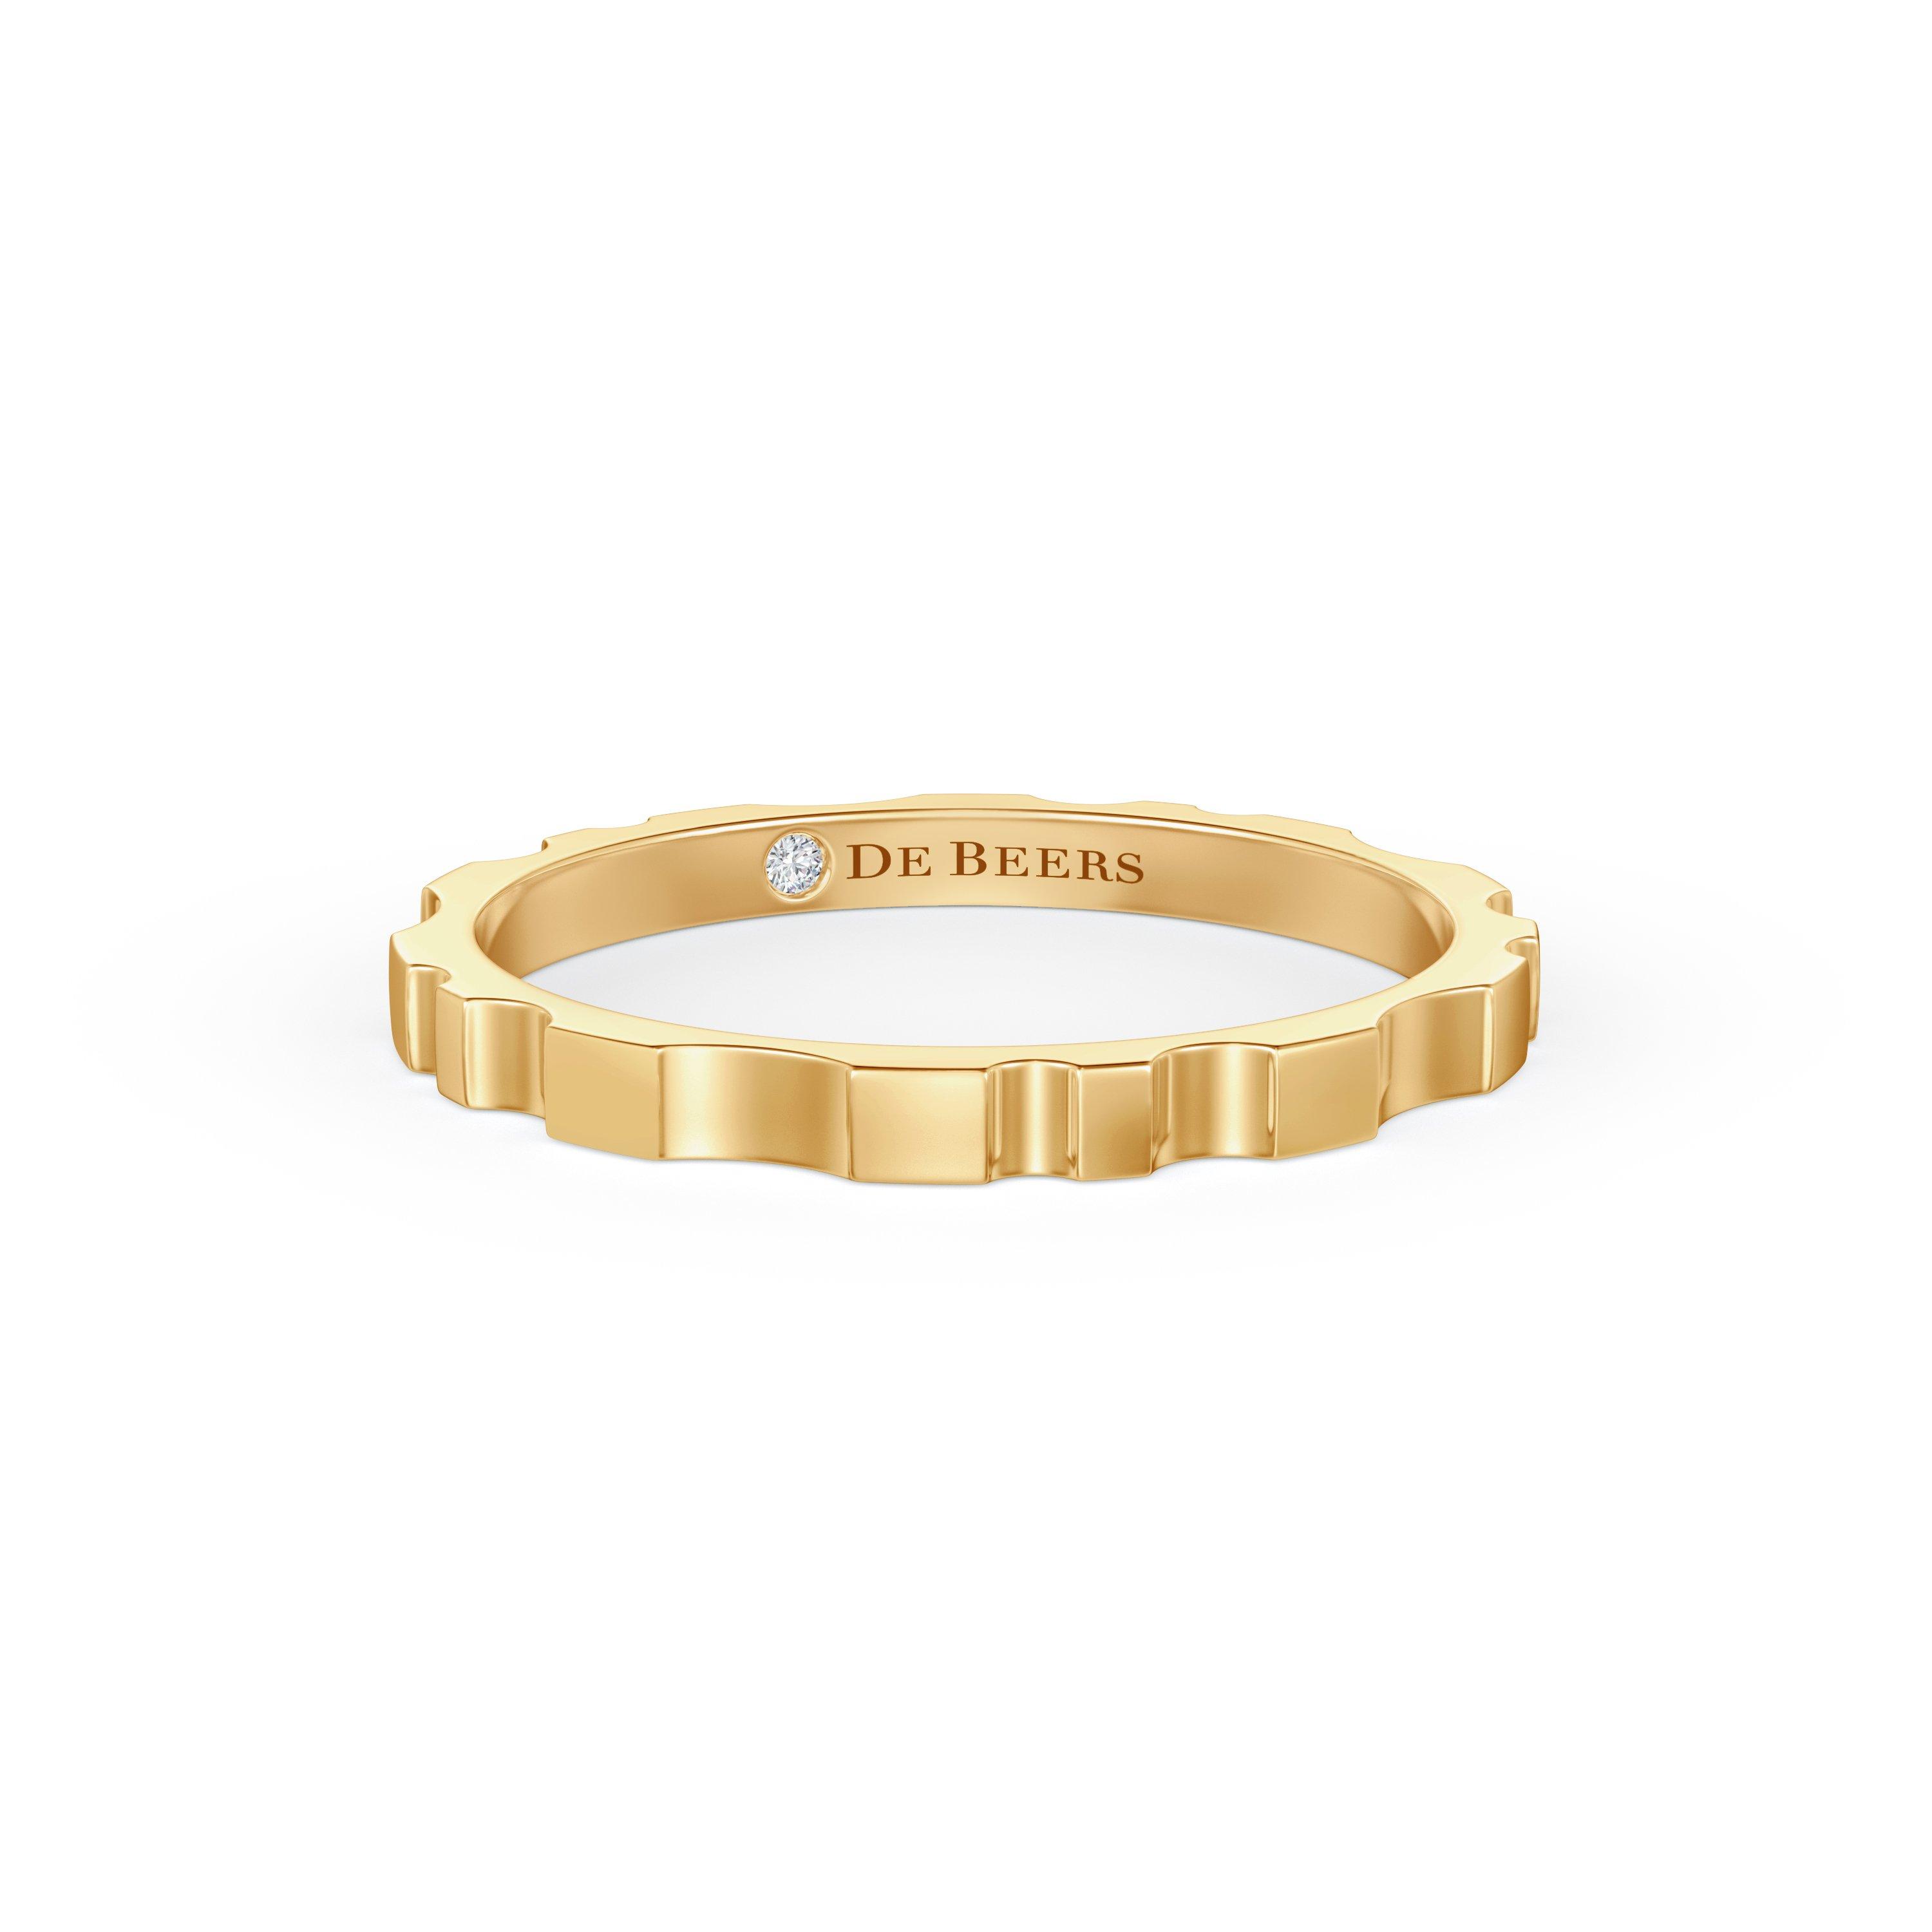 De Beers RVL Band Ring in Yellow Gold, image 1